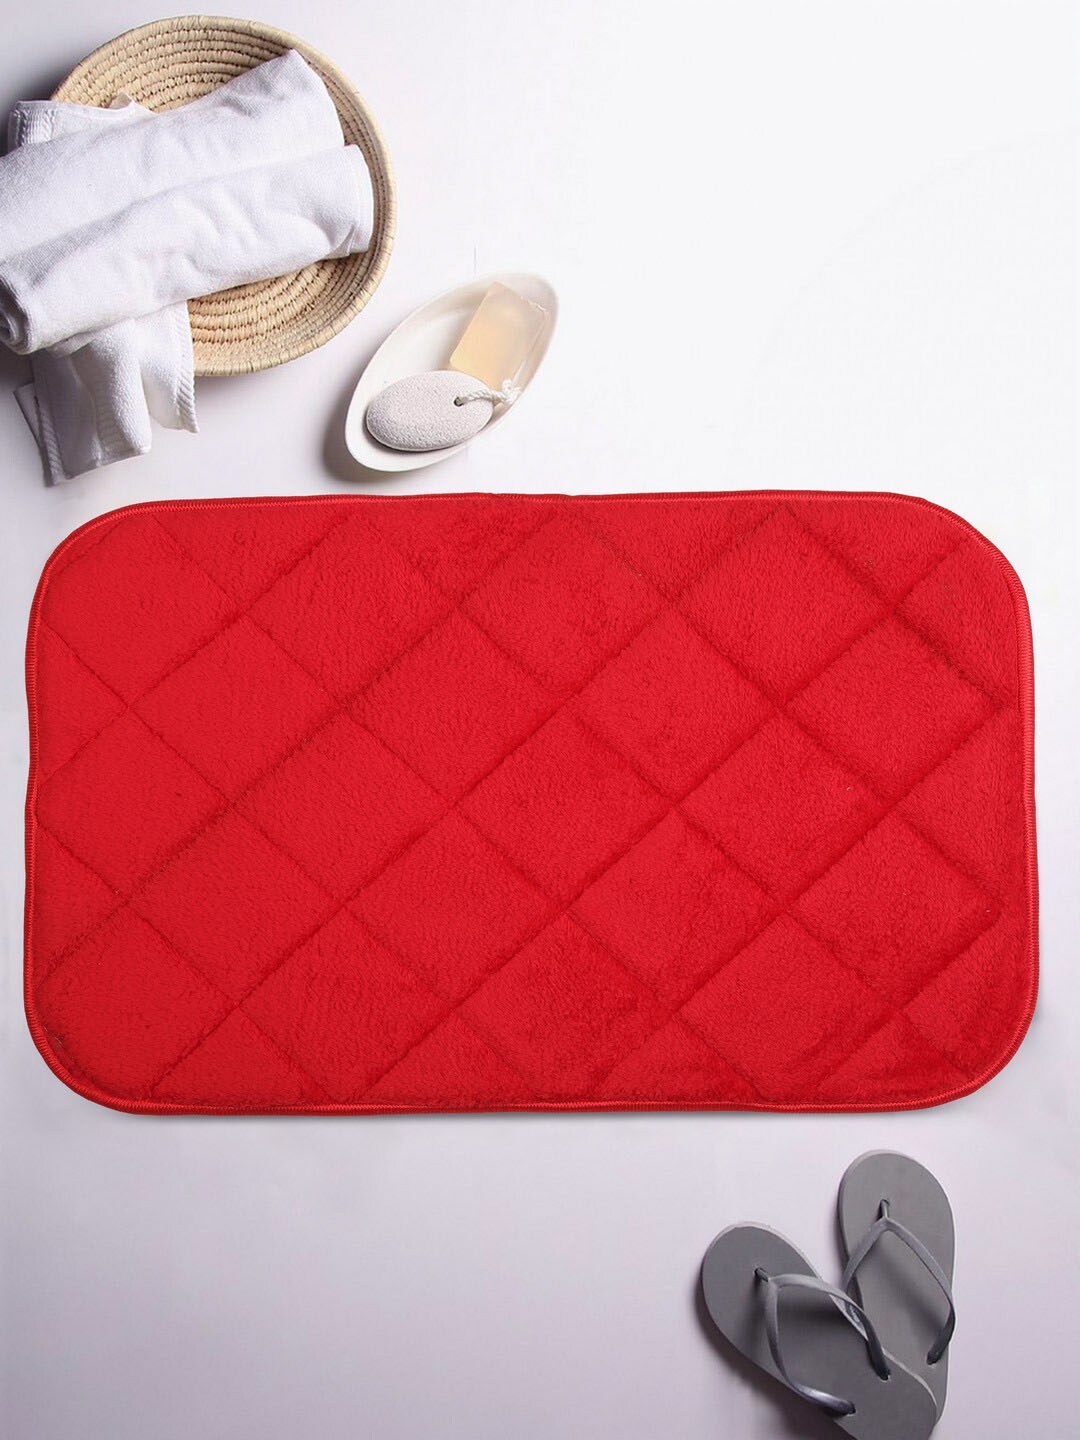 Lushomes Red Bathmat Price in India